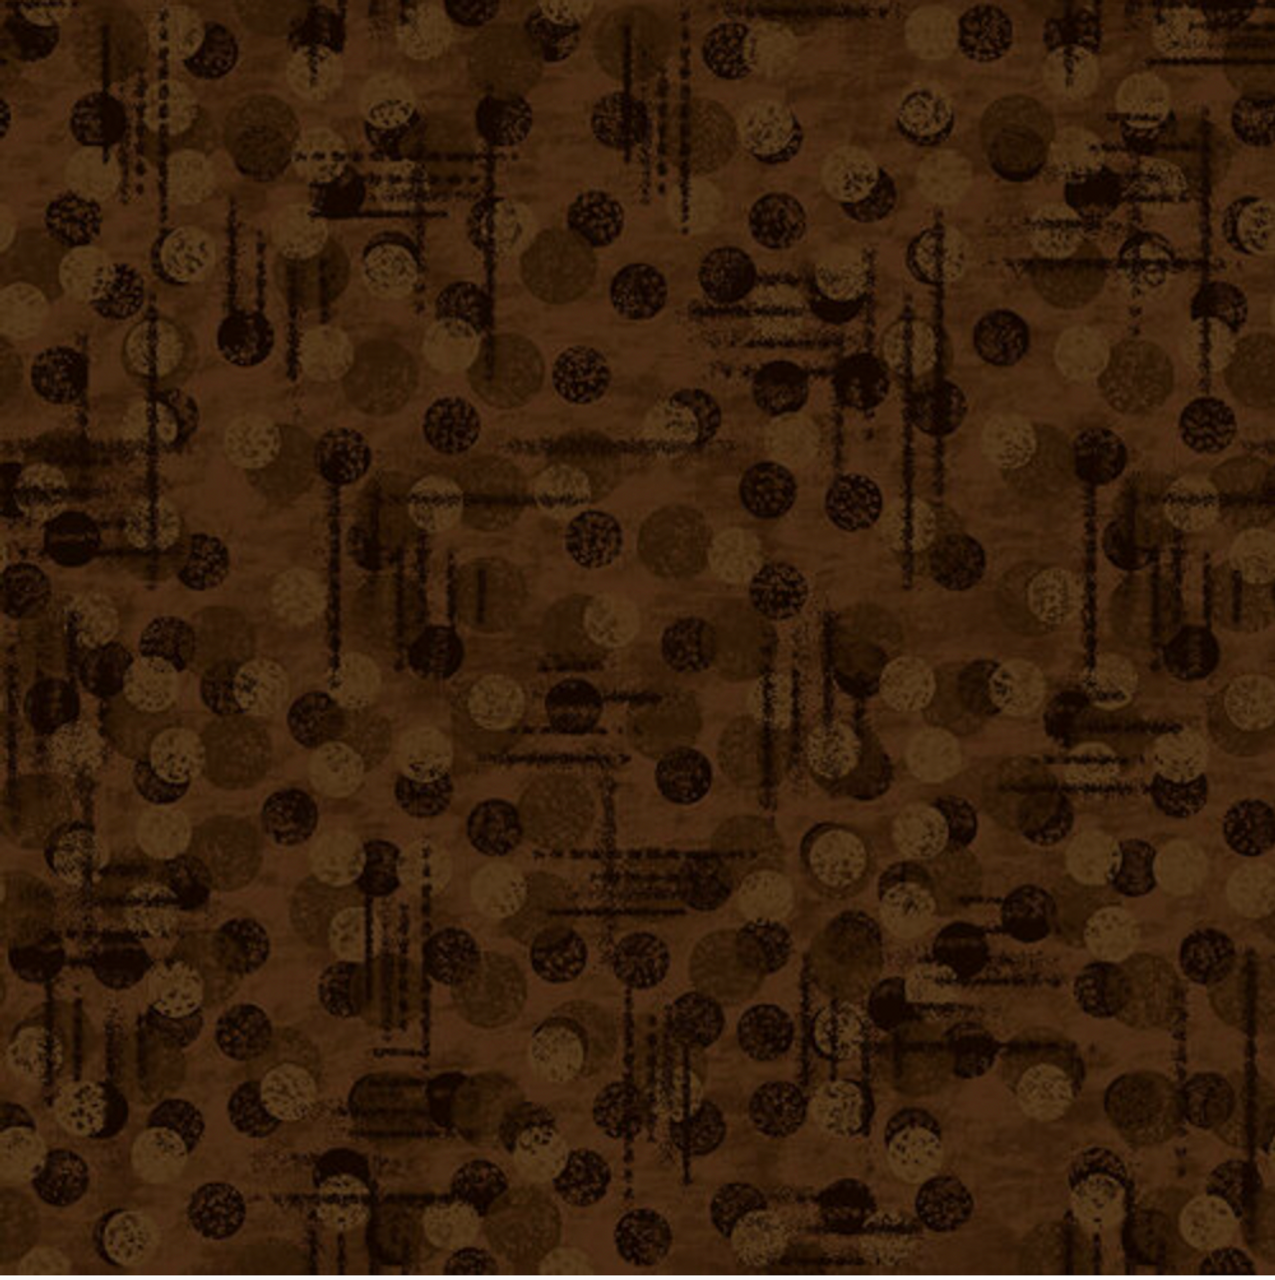 Blank Quilting Jot Dot Brown Cotton Fabric By The Yard